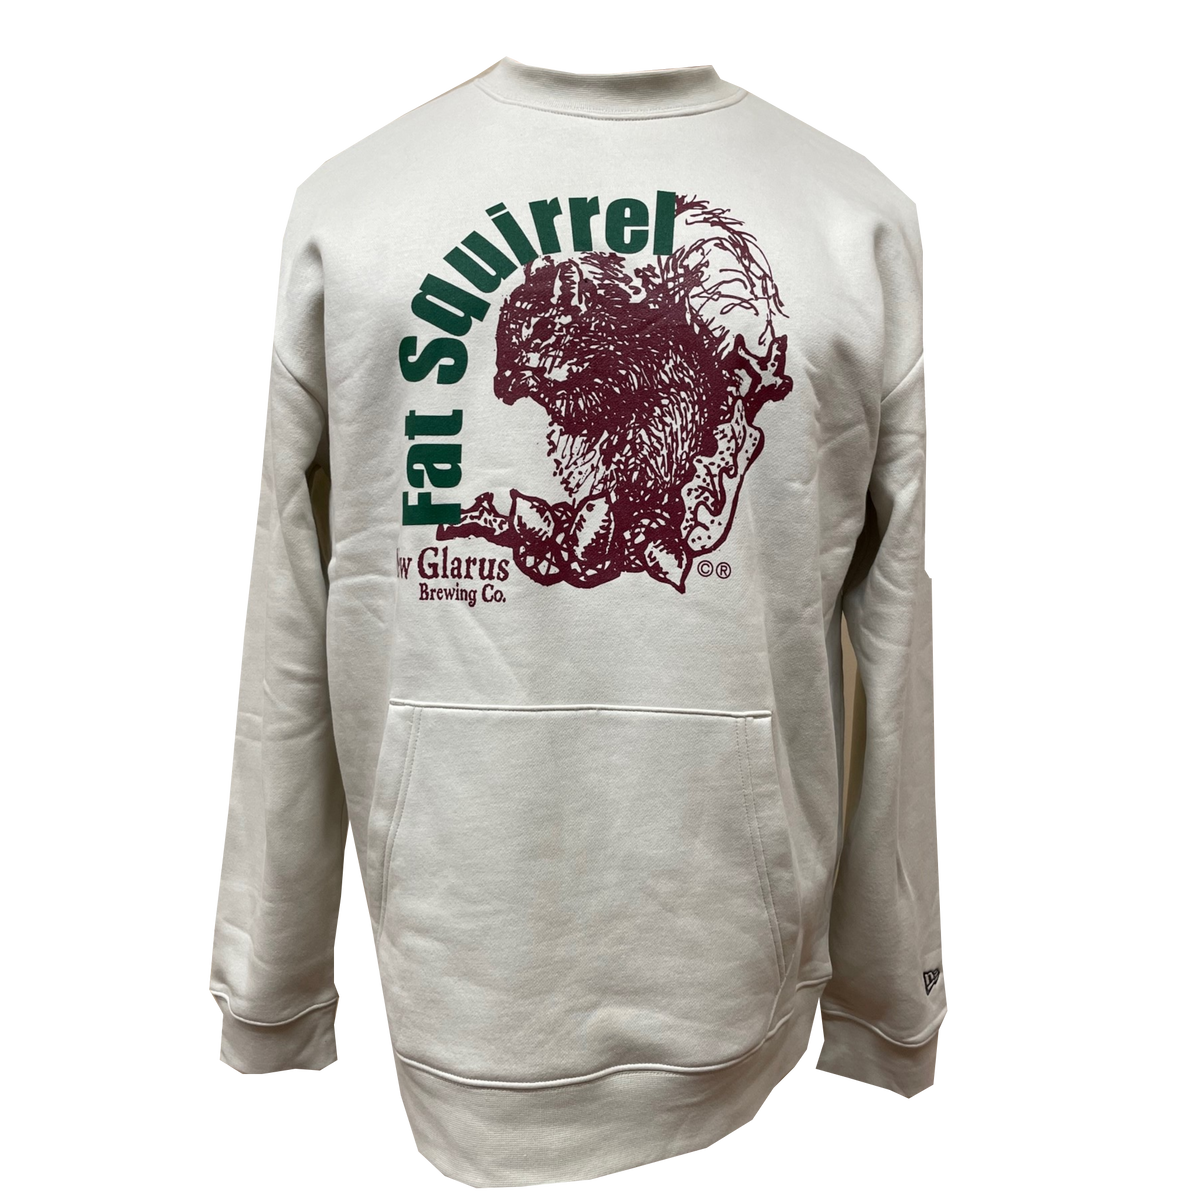 Cream crew neck sweatshirt with the Fat Squirrel logo in green and burgundy. Features a kangaroo pocket in front.